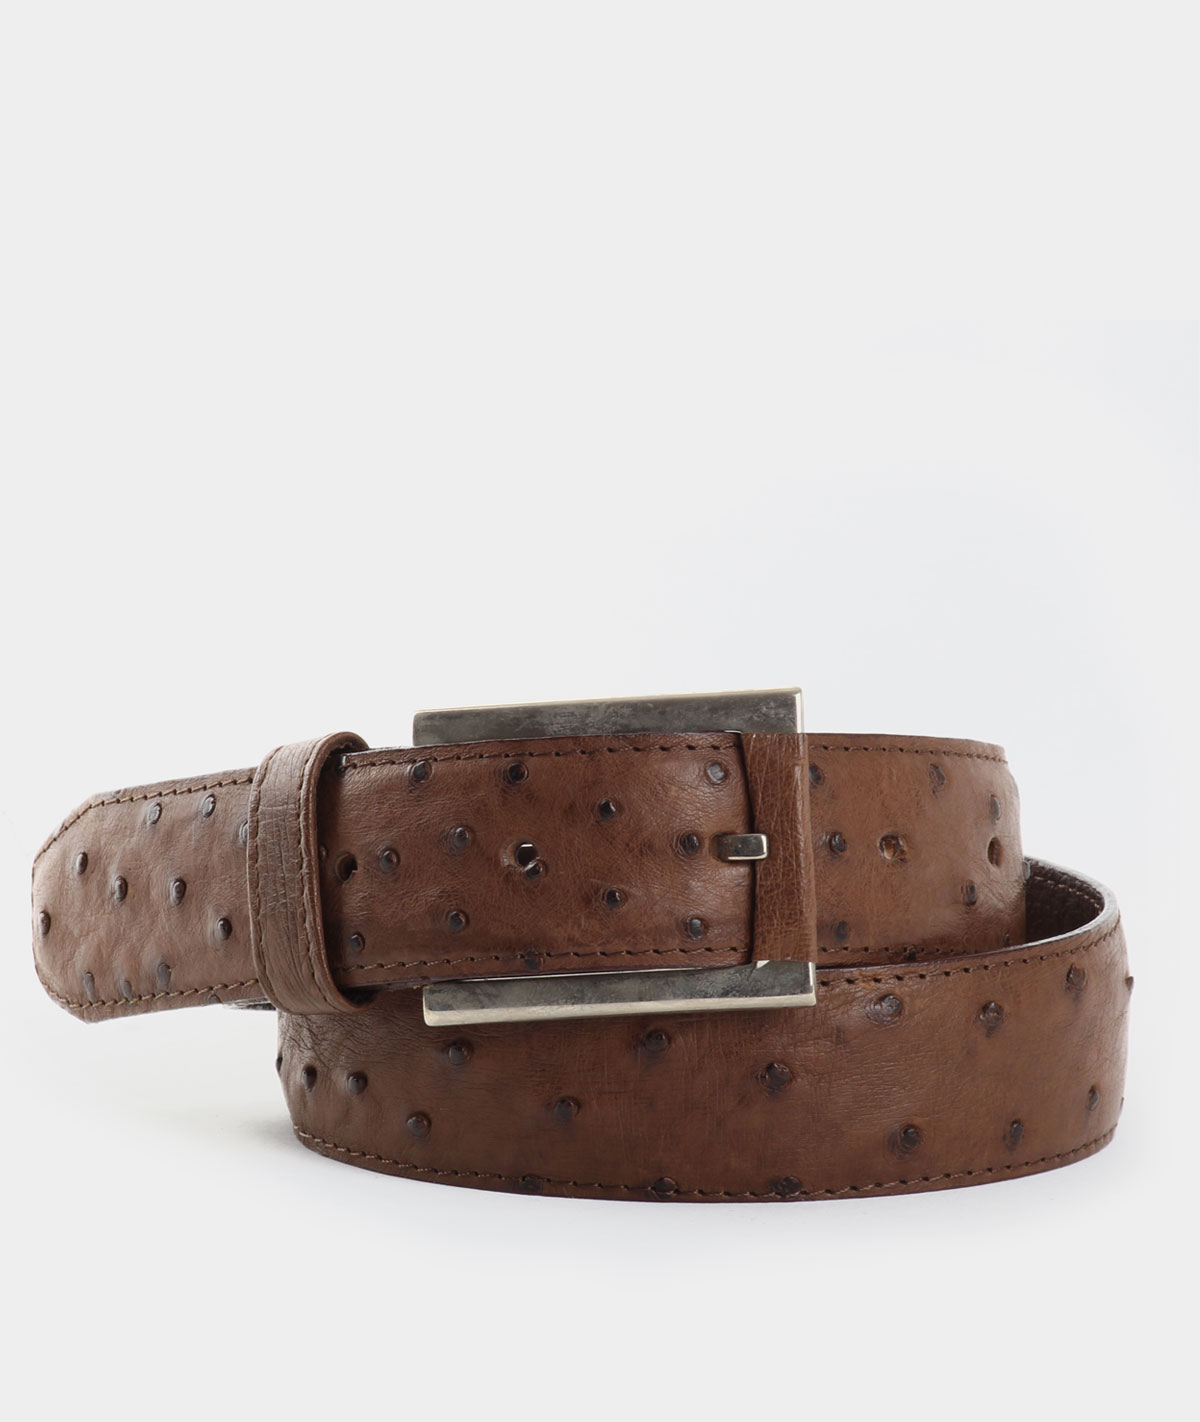 Top quality genuine ostrich leather belts hand-made in South Africa. Shop online and get your ...